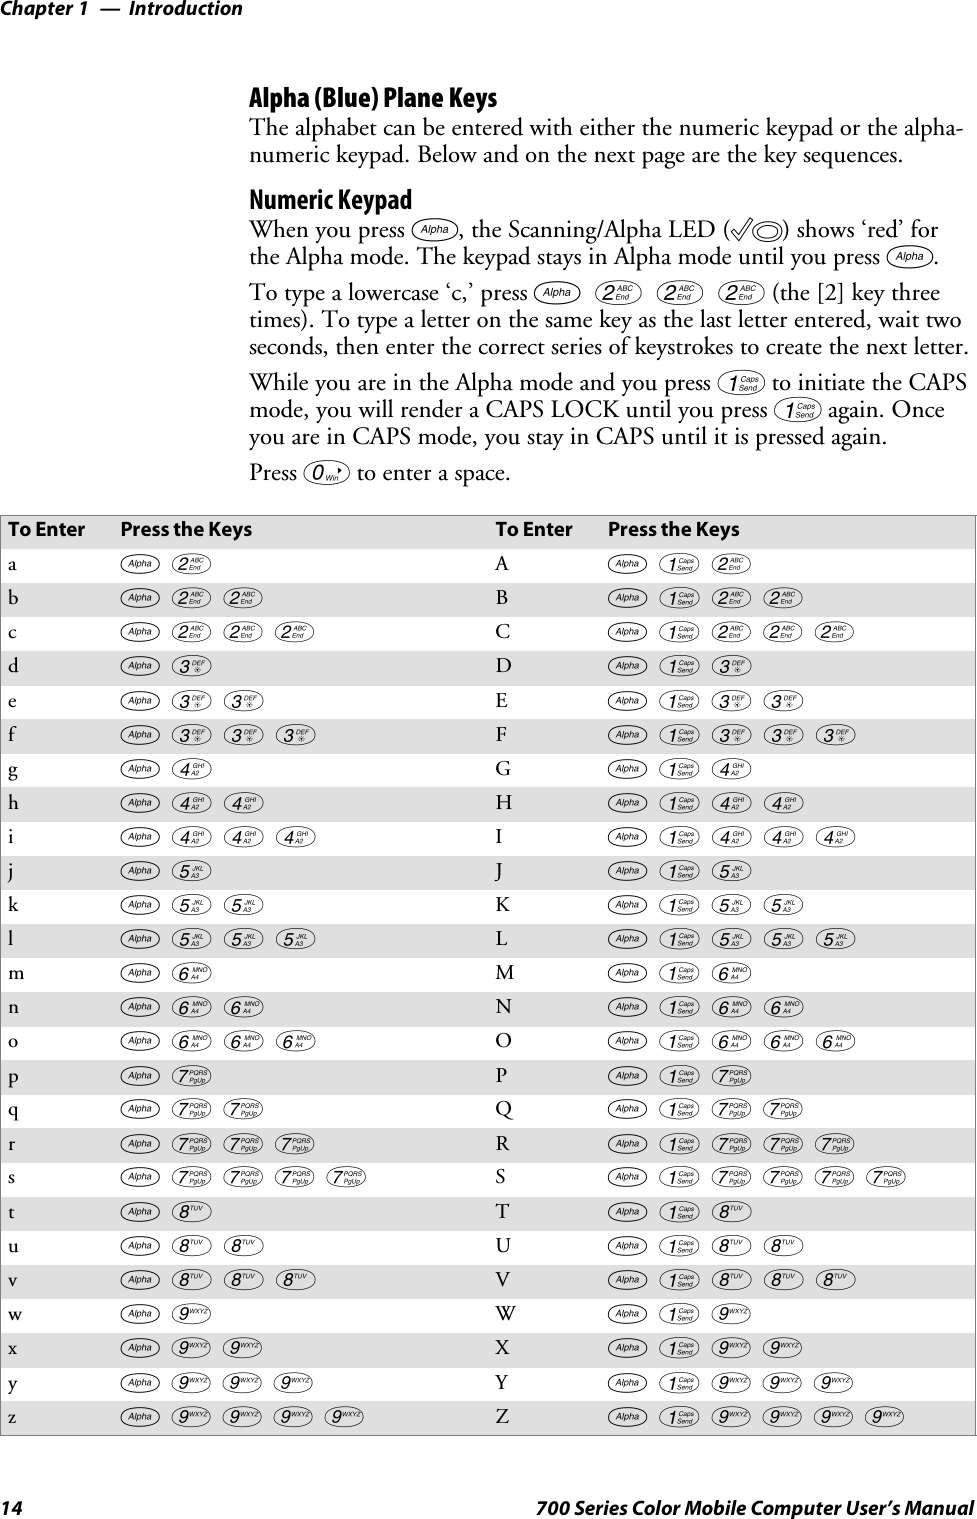 IntroductionChapter —114 700 Series Color Mobile Computer User’s ManualAlpha (Blue) Plane KeysThe alphabet can be entered with either the numeric keypad or the alpha-numeric keypad. Below and on the next page are the key sequences.Numeric KeypadWhen you press F, the Scanning/Alpha LED (C) shows ‘red’ forthe Alpha mode. The keypad stays in Alpha mode until you press F.To type a lowercase ‘c,’ press F222(the [2] key threetimes). To type a letter on the same key as the last letter entered, wait twoseconds, then enter the correct series of keystrokes to create the next letter.WhileyouareintheAlphamodeandyoupress1to initiate the CAPSmode, you will render a CAPS LOCK until you press 1again. Onceyou are in CAPS mode, you stay in CAPS until it is pressed again.Press 0to enter a space.To Enter Press the Keys To Enter Press the KeysaF2 AF12bF22 BF122cF222 CF1222dF3 DF13eF33 EF133fF333 FF1333gF4 GF14hF44 HF144iF444 IF1444jF5 JF15kF55 KF155lF555 LF1555mF6 MF16nF66 NF166oF666 OF1666pF7 PF17qF77 QF177rF777 RF1777sF7777 SF17777tF8 TF18uF88 UF188vF888 VF1888wF9 WF19xF99 XF199yF999 YF1999zF9999 ZF19999